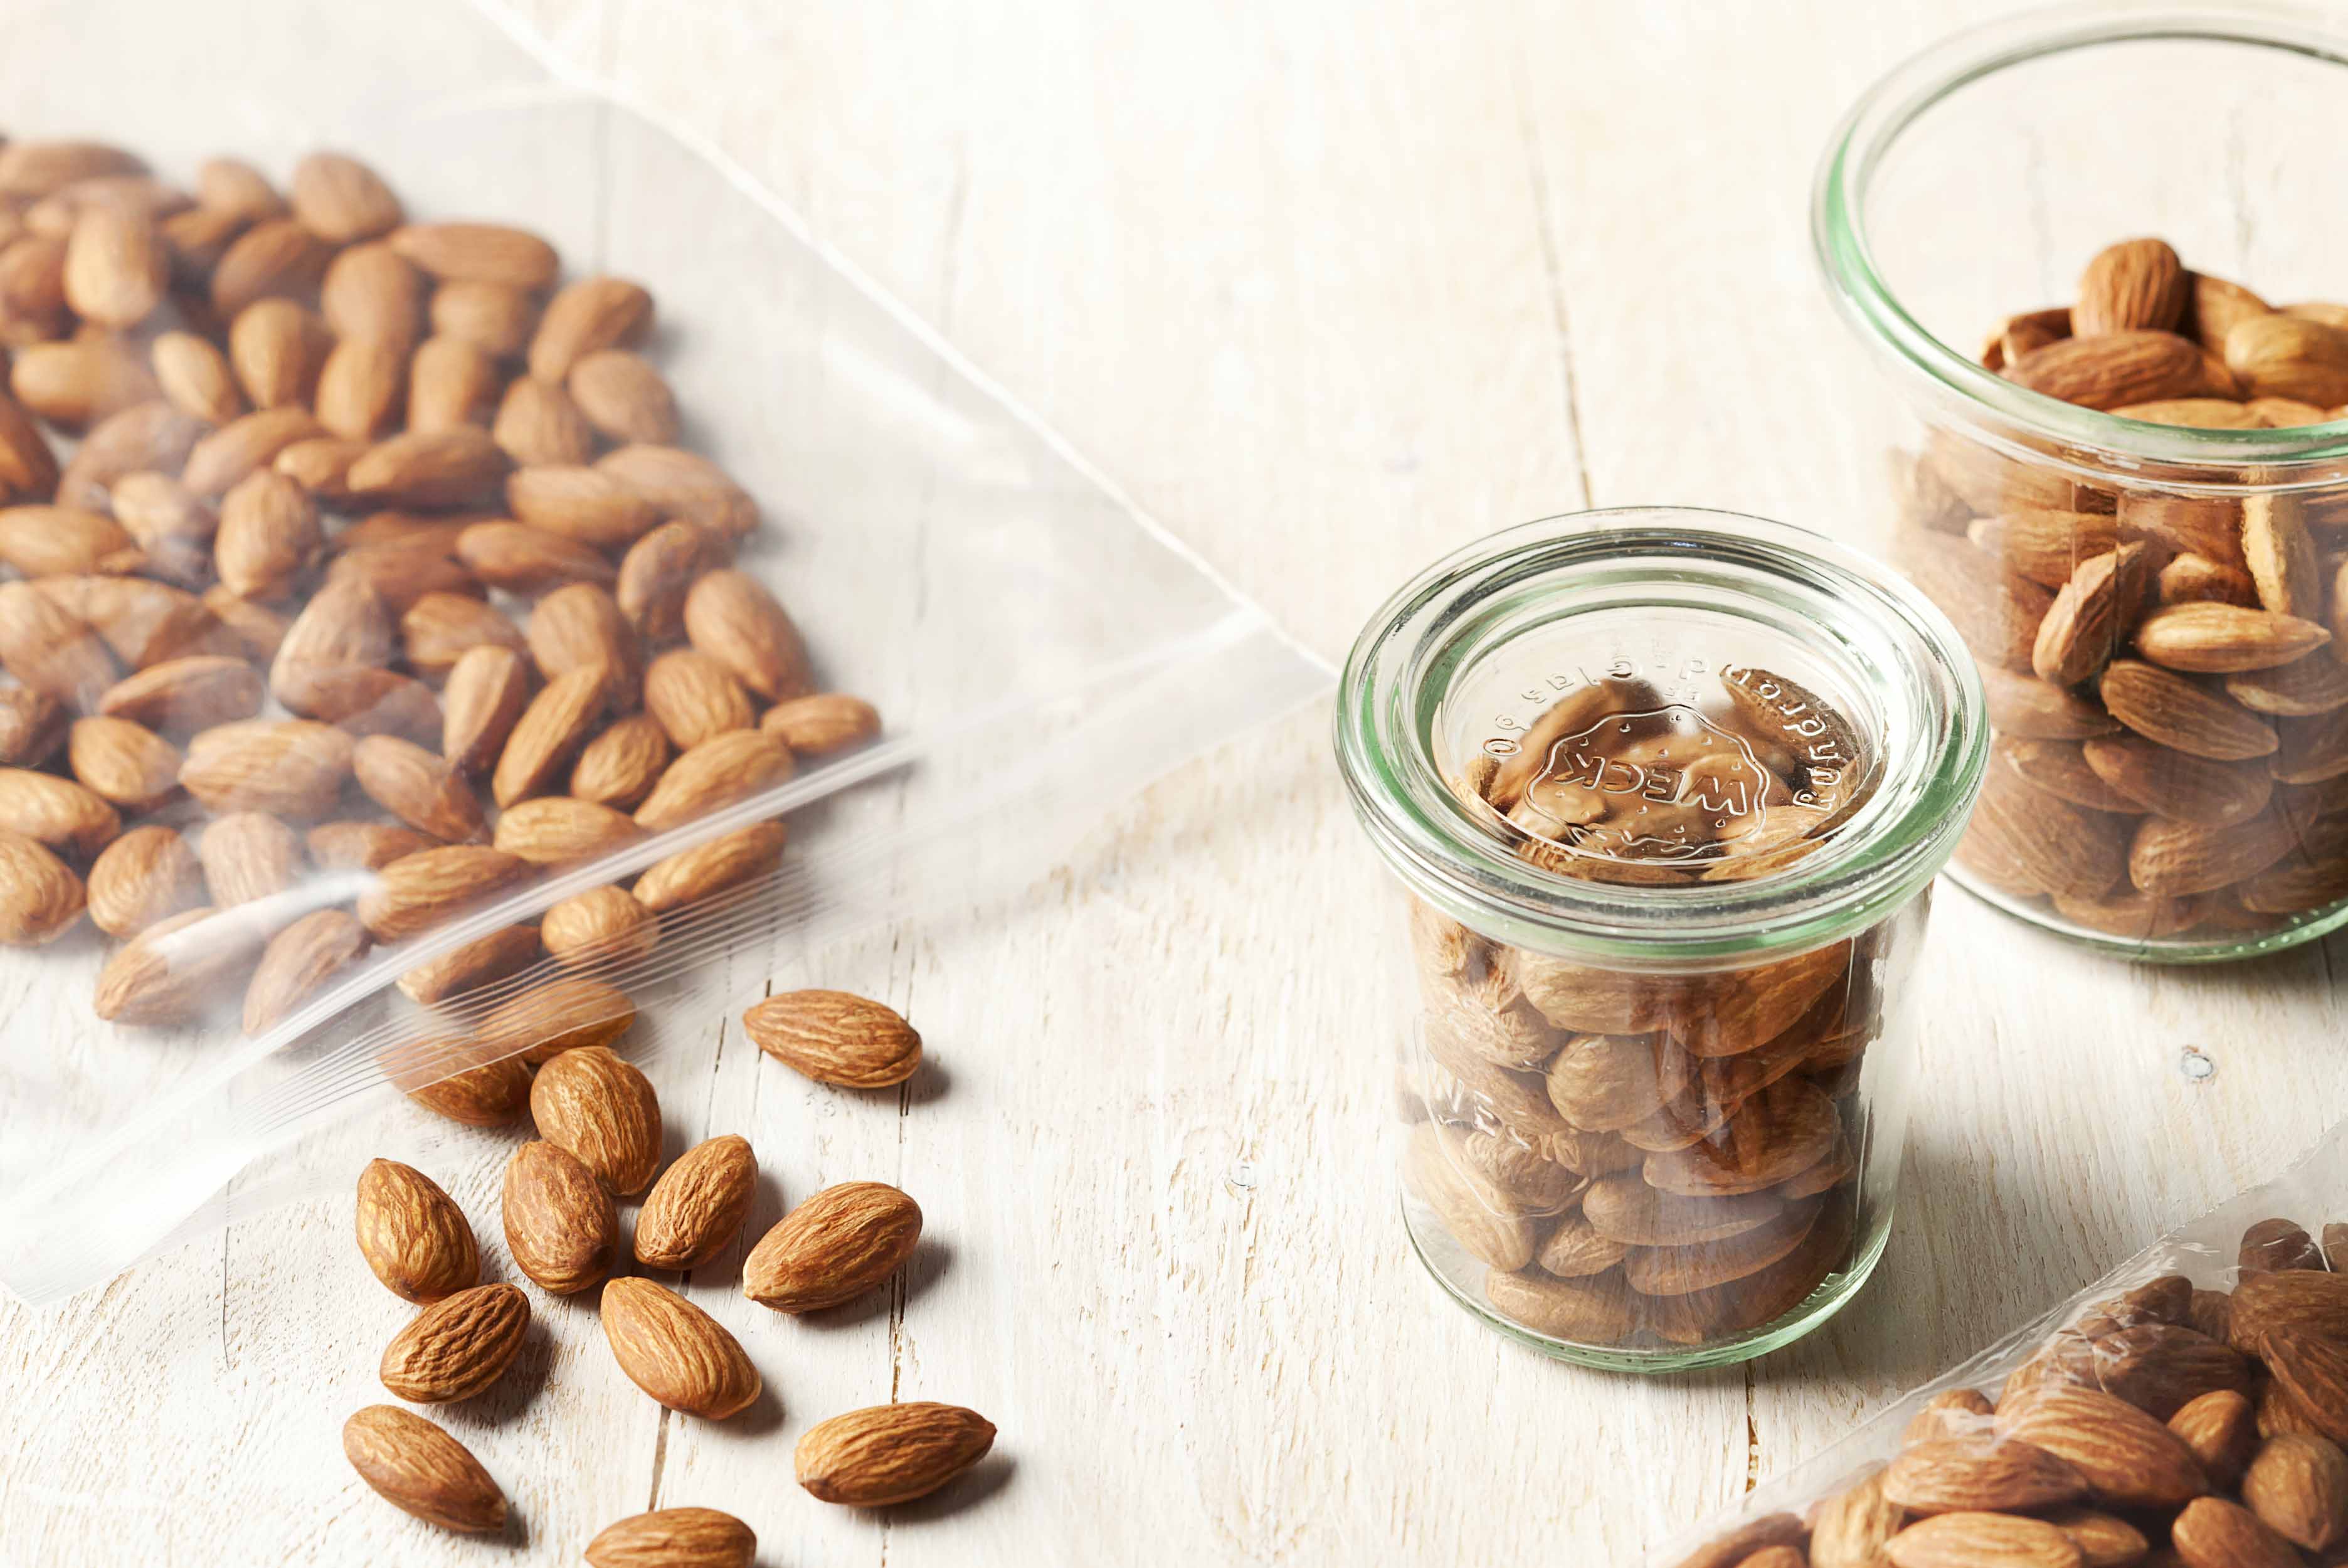 New Study Examines the Benefits of Eating Almonds on  Blood Sugar and Daily Calorie Intake